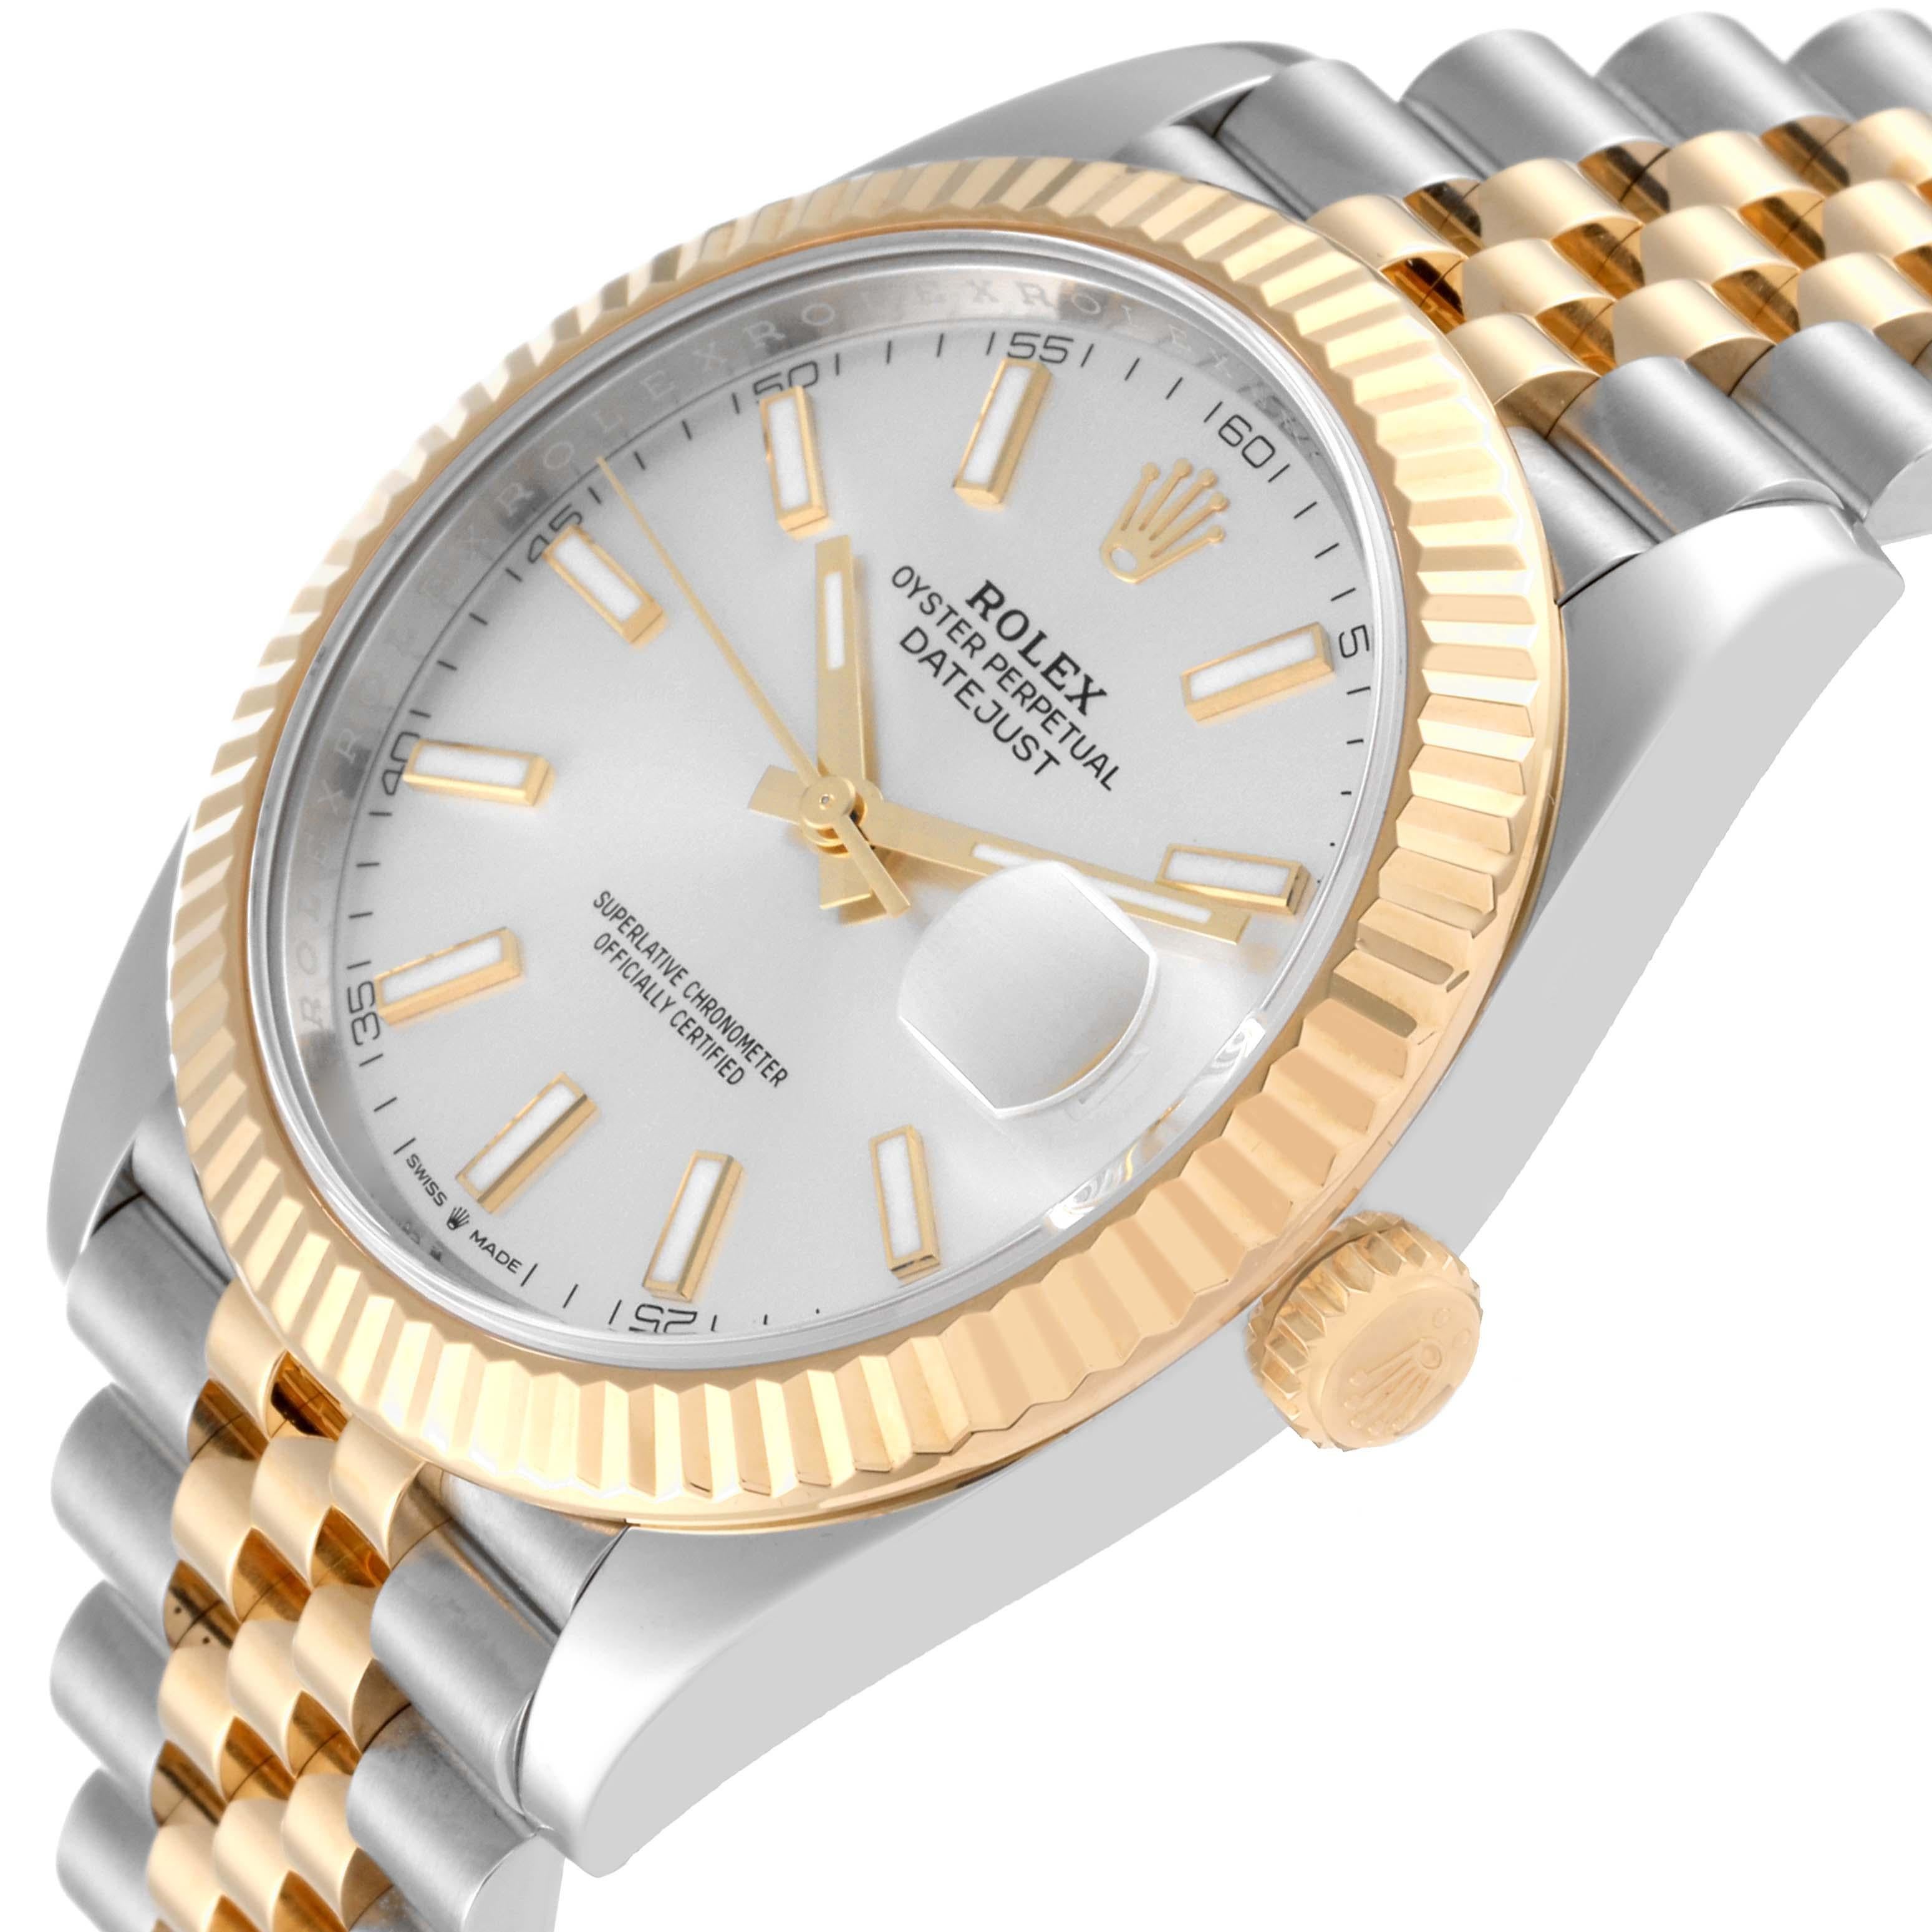 Rolex Datejust 41 Steel Yellow Gold Silver Dial Mens Watch 126333 Box Card 1